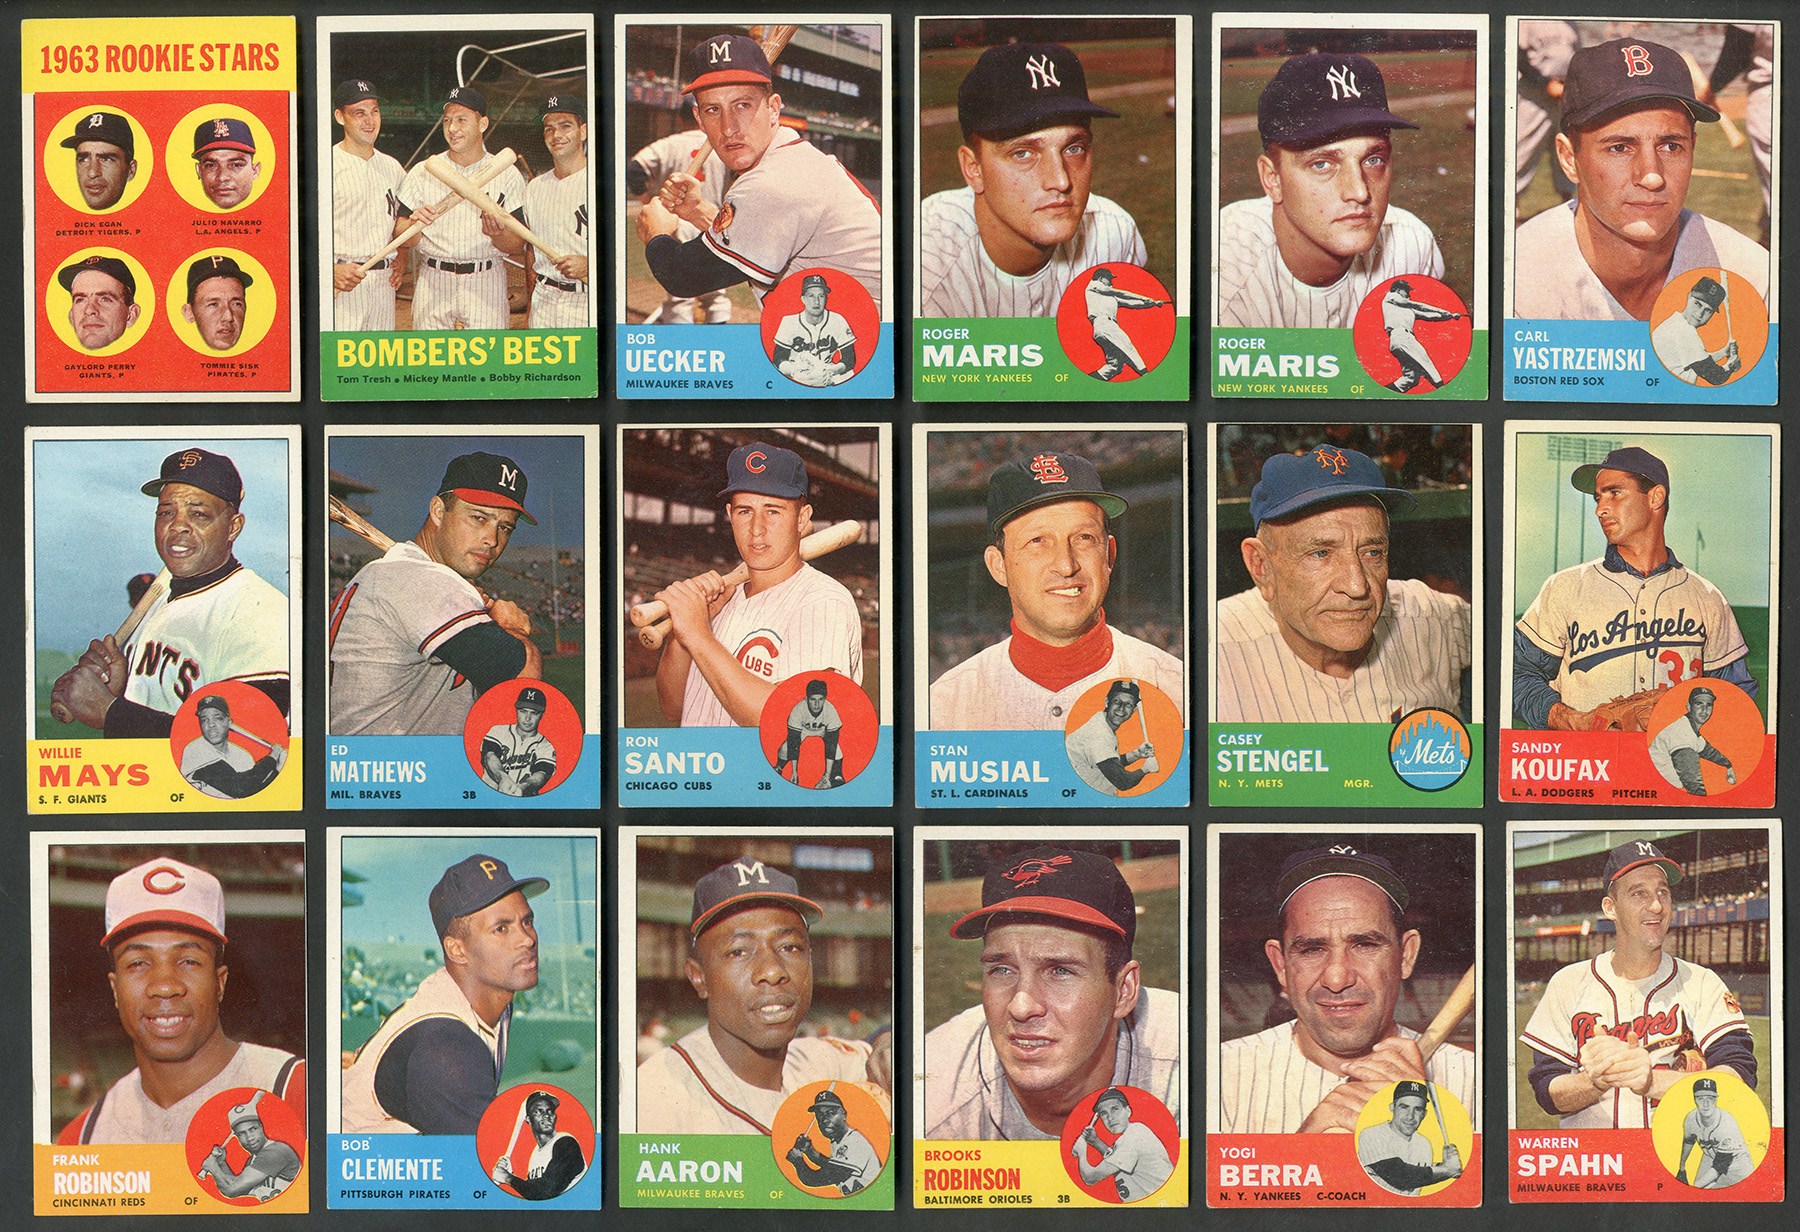 Baseball and Trading Cards - 1963 Topps Hoard of 2,200+ Cards with Stars - LOADED!